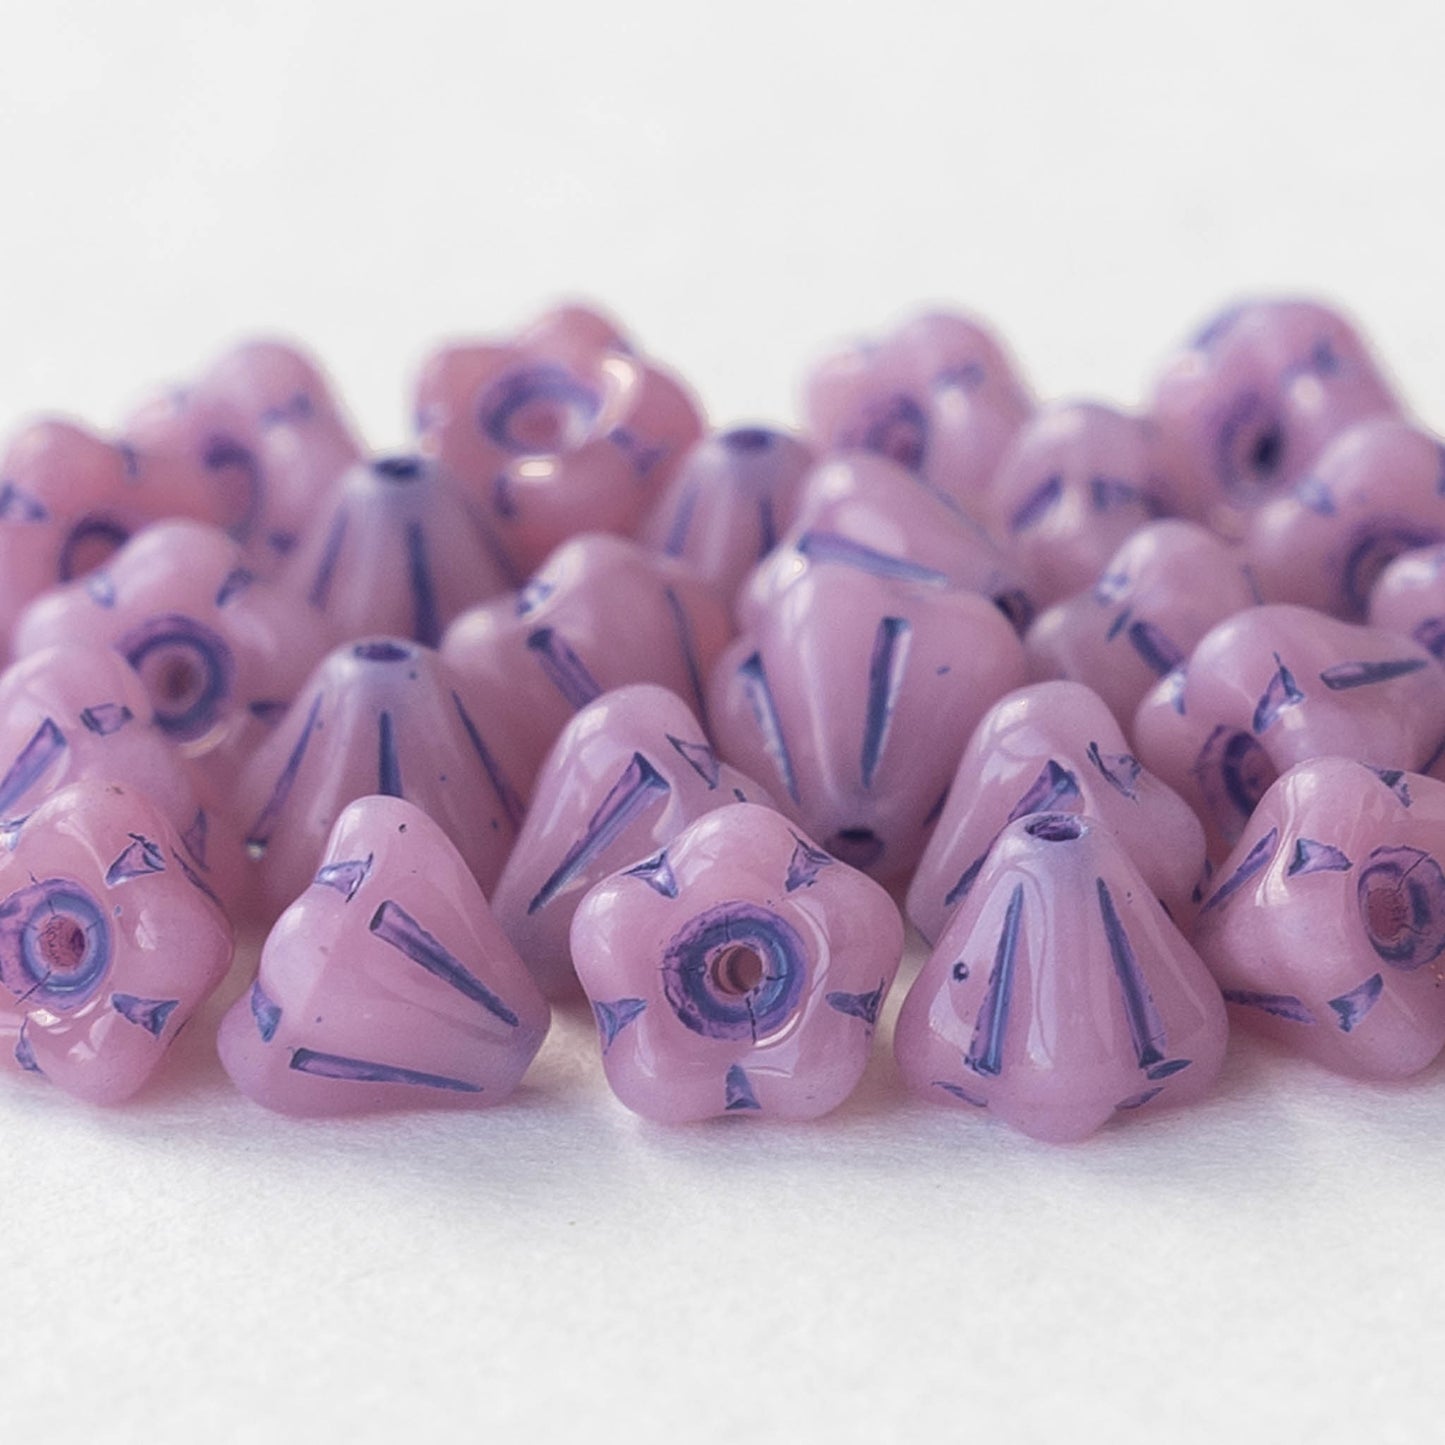 Load image into Gallery viewer, 4x6mm Bell Flower Beads - Lavender with Blue - 30 Beads
